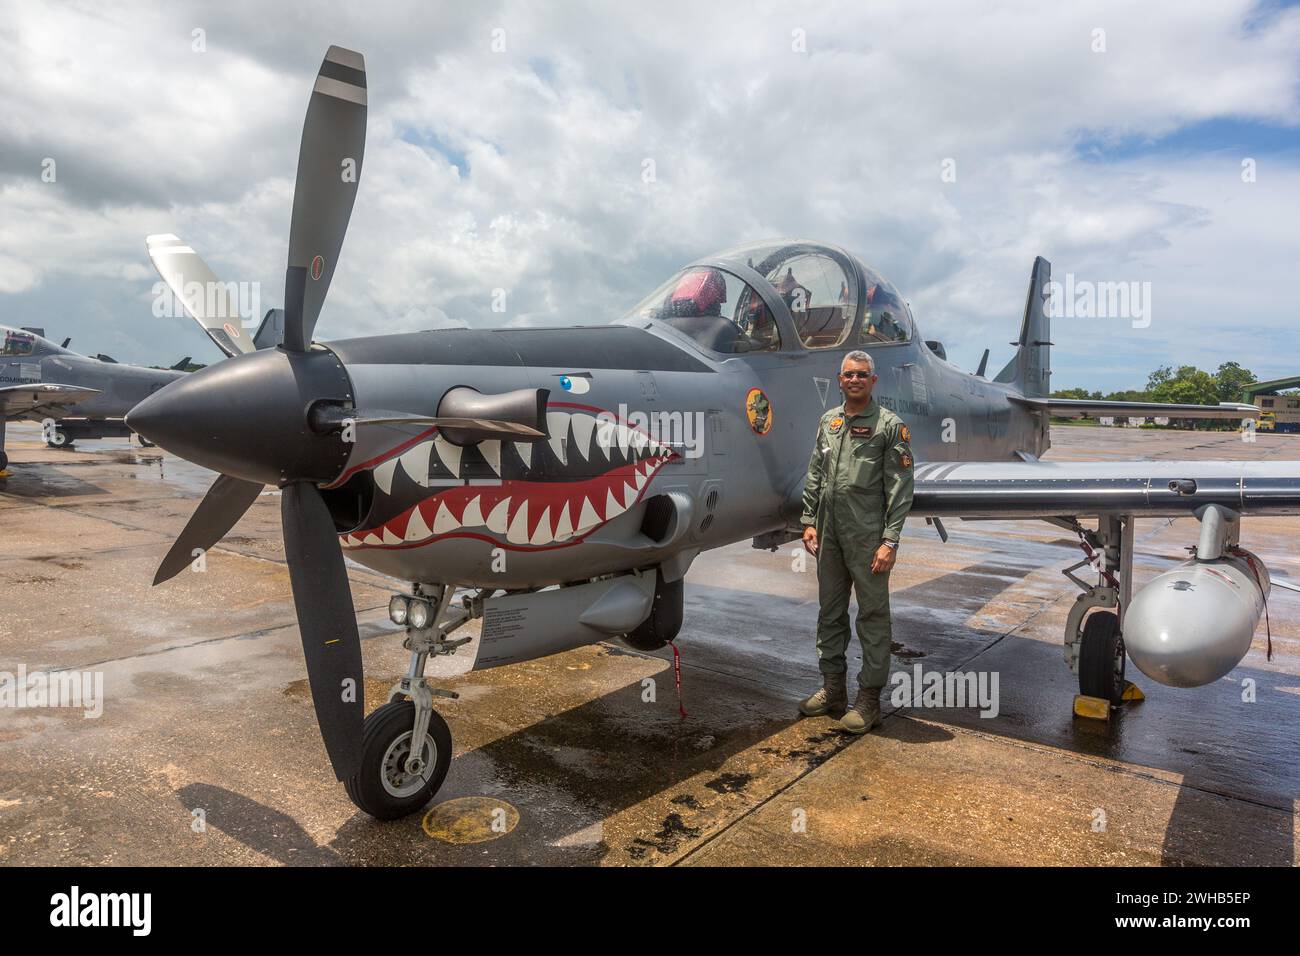 A Dominican Air Force pilot by a Super Tucano fighter aircraft at the San Isidro Air Base in the Dominican Republic. Stock Photo